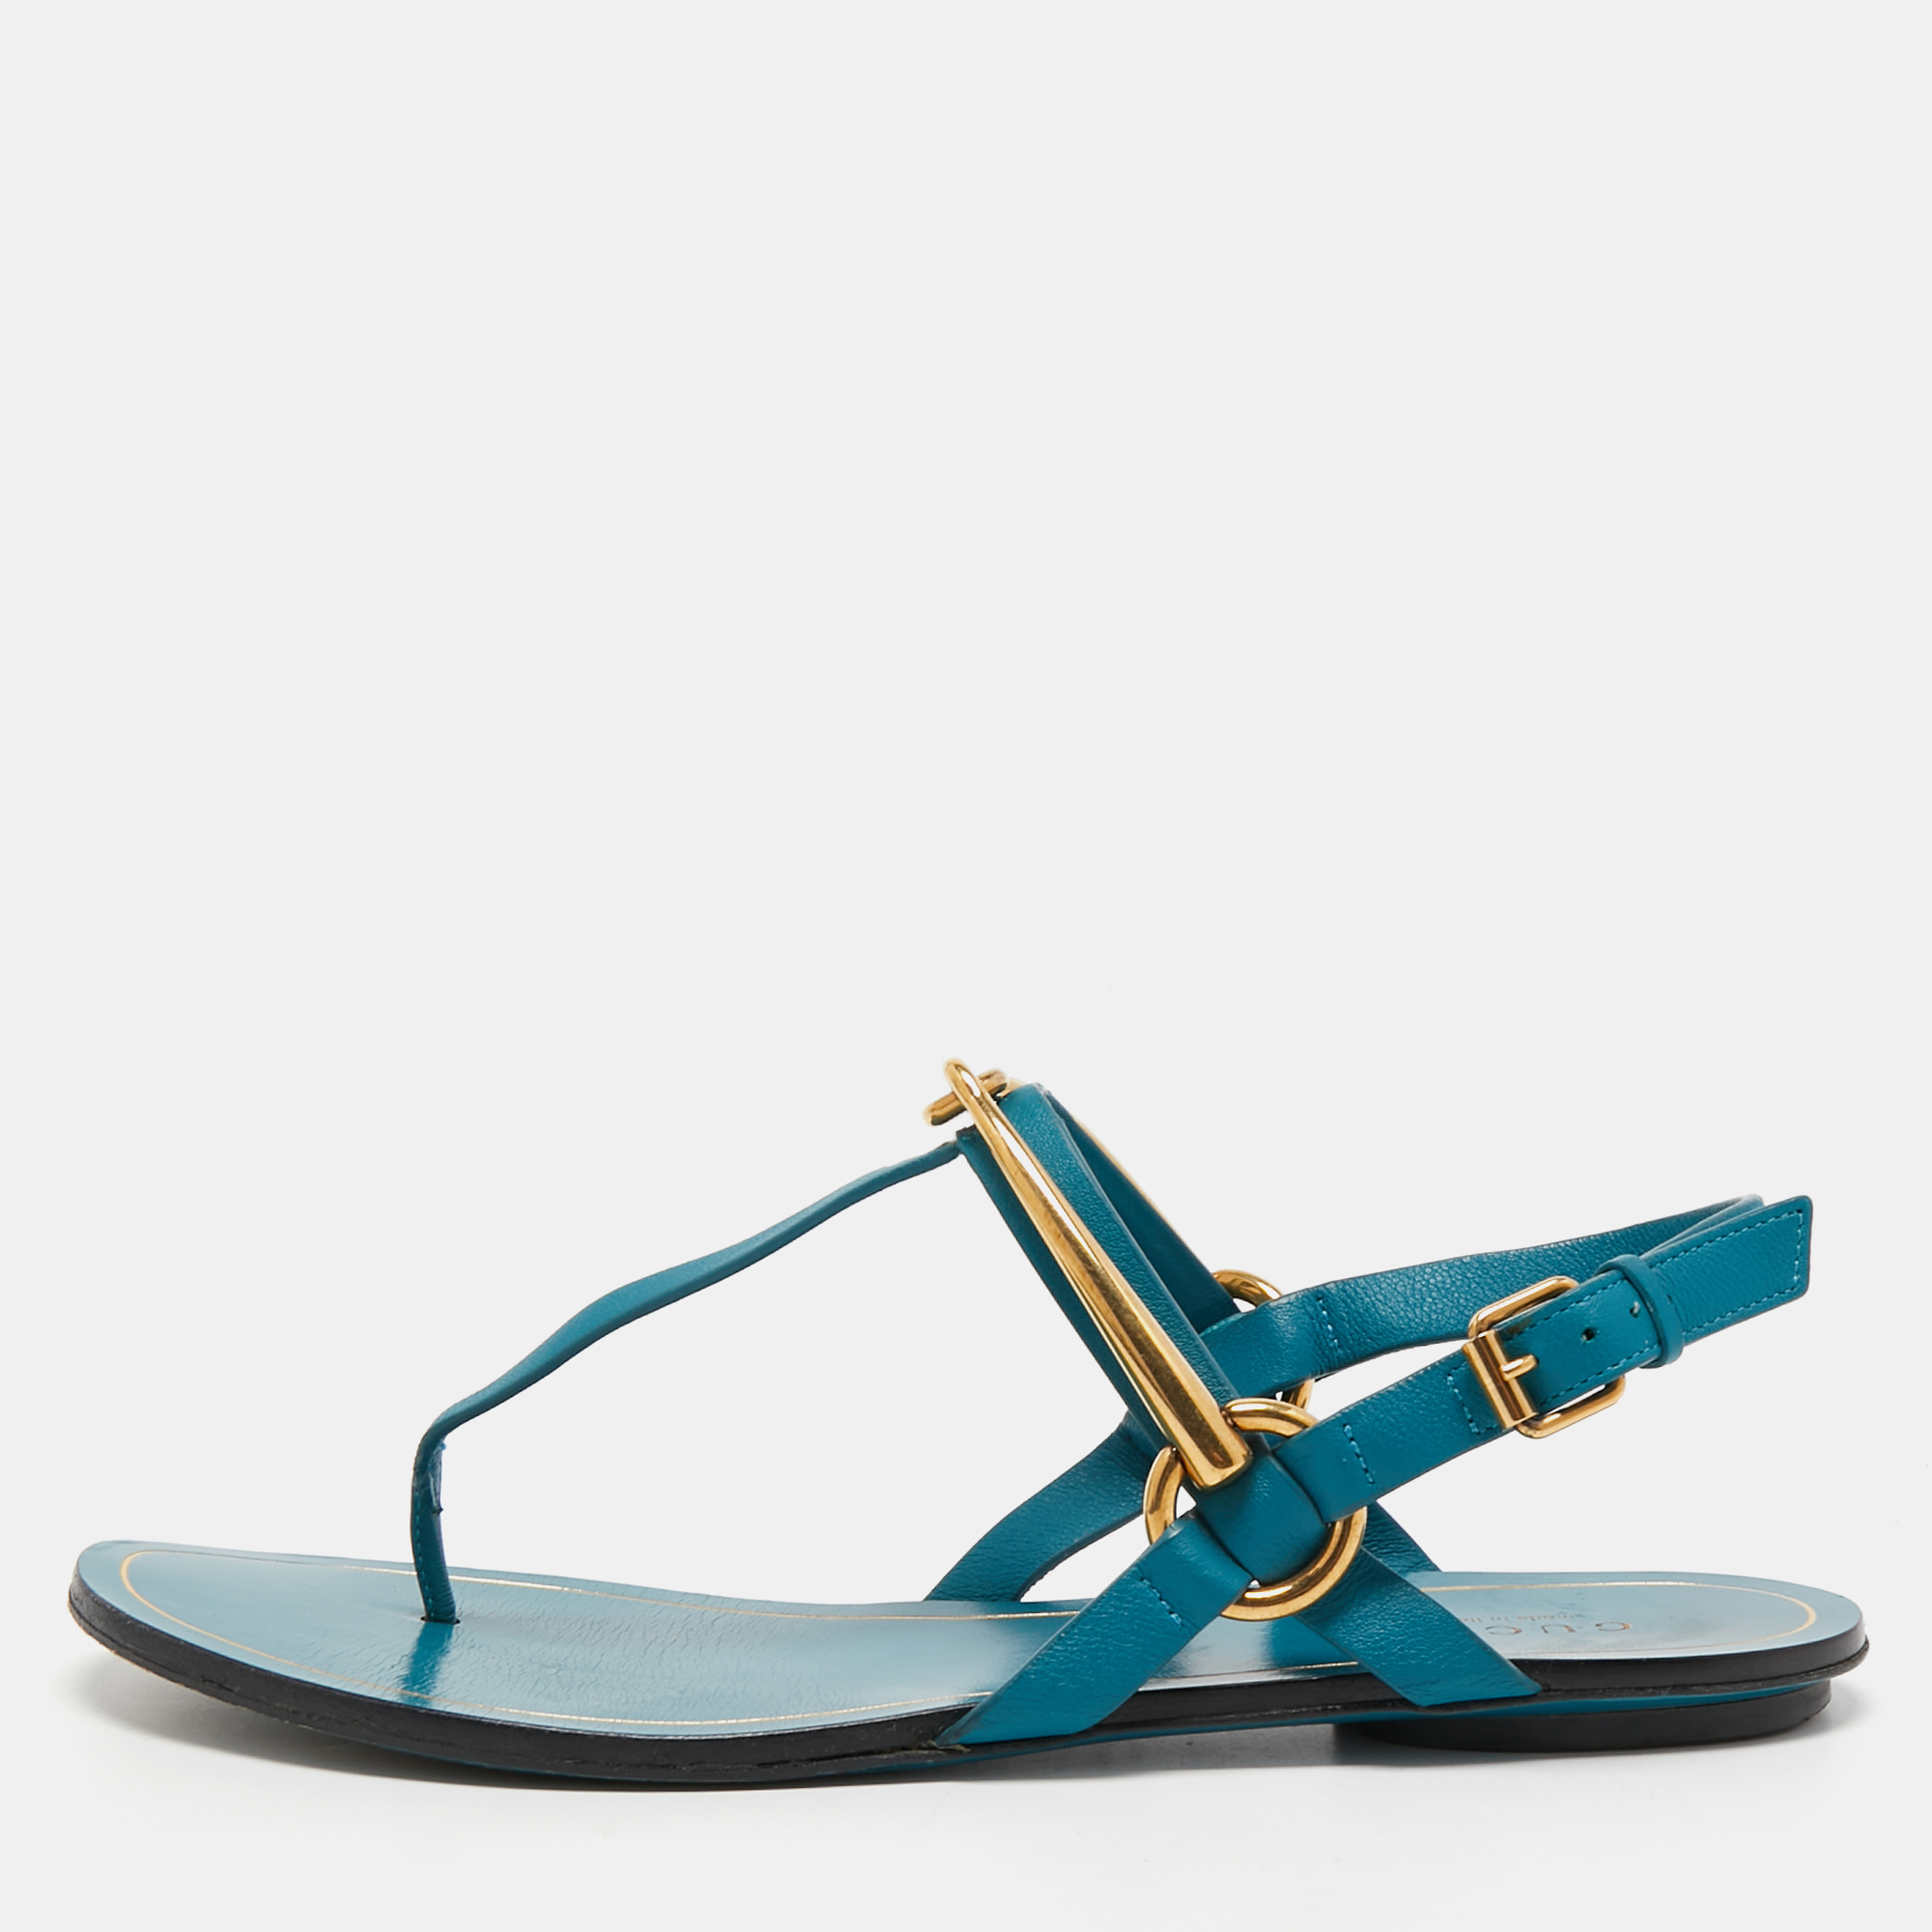 Pre-owned Gucci Blue Leatherthong Ankle Strap Flat Sandals Size 35.5